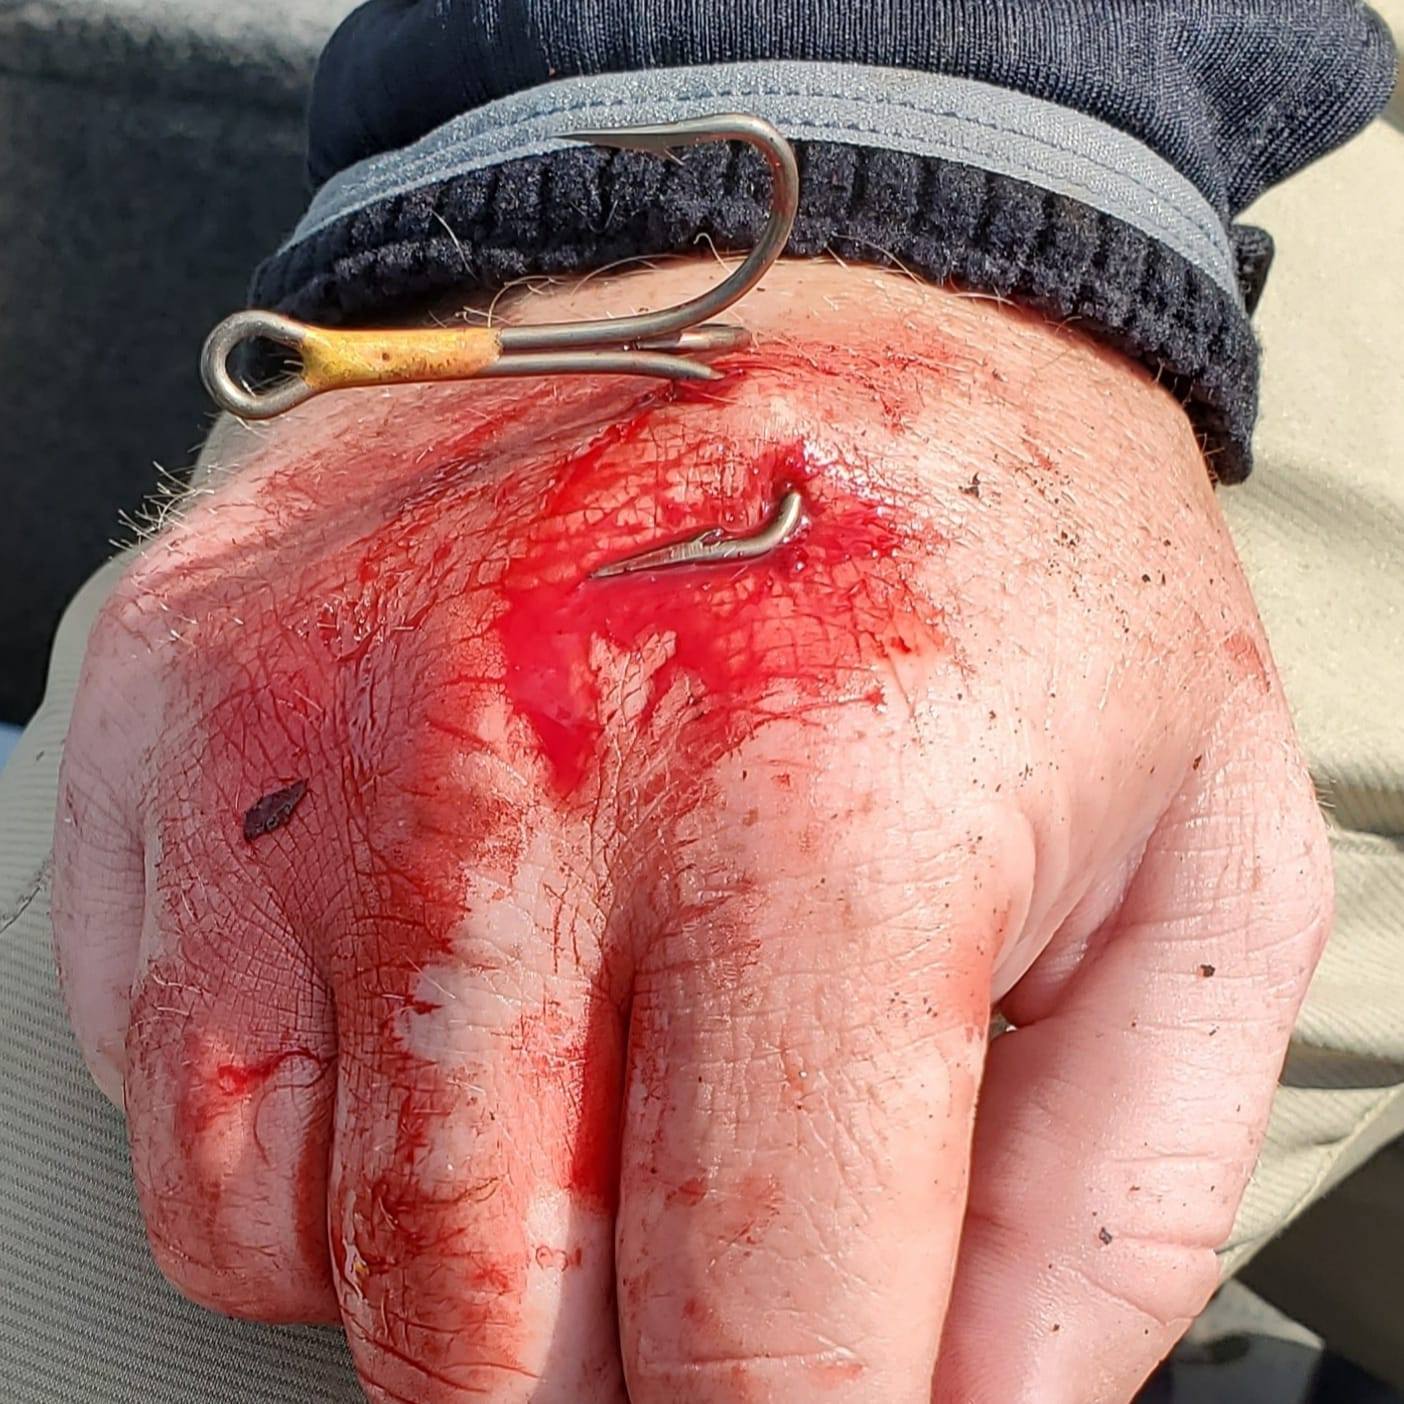 Fish-hook injuries: a risk for fishermen, Head & Face Medicine